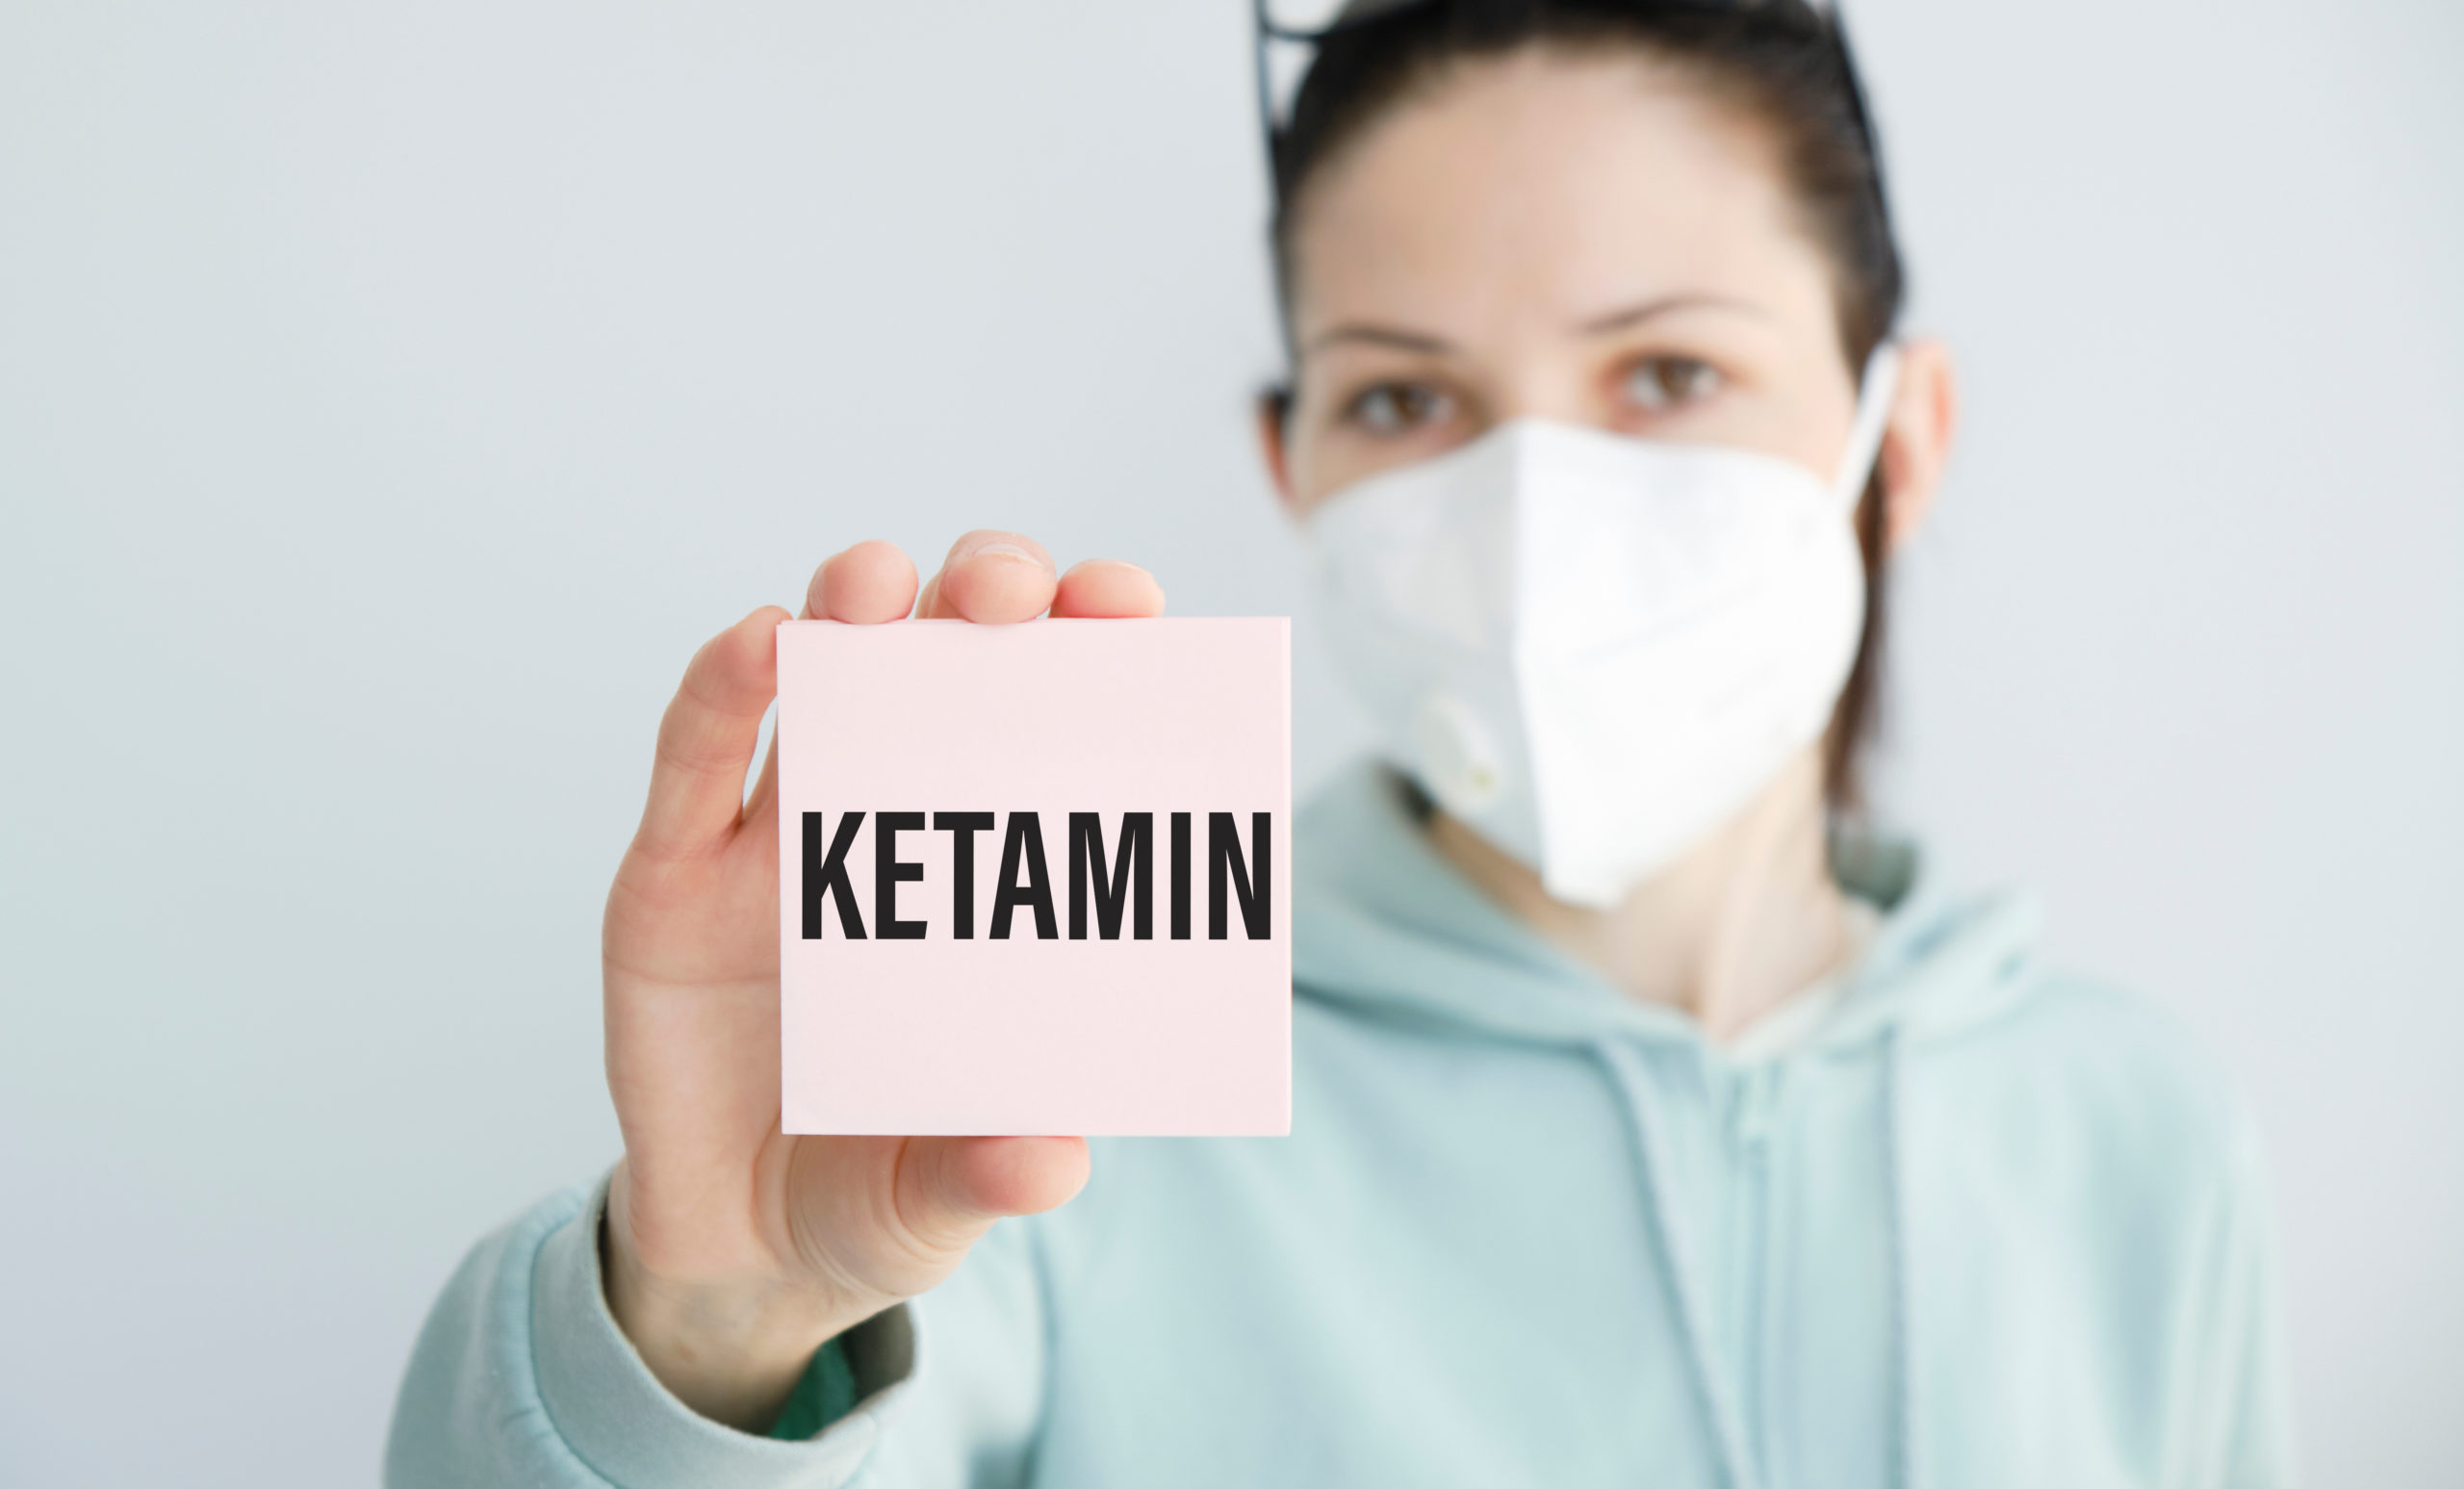 Doctor holding a card with text ketamine,medical concept